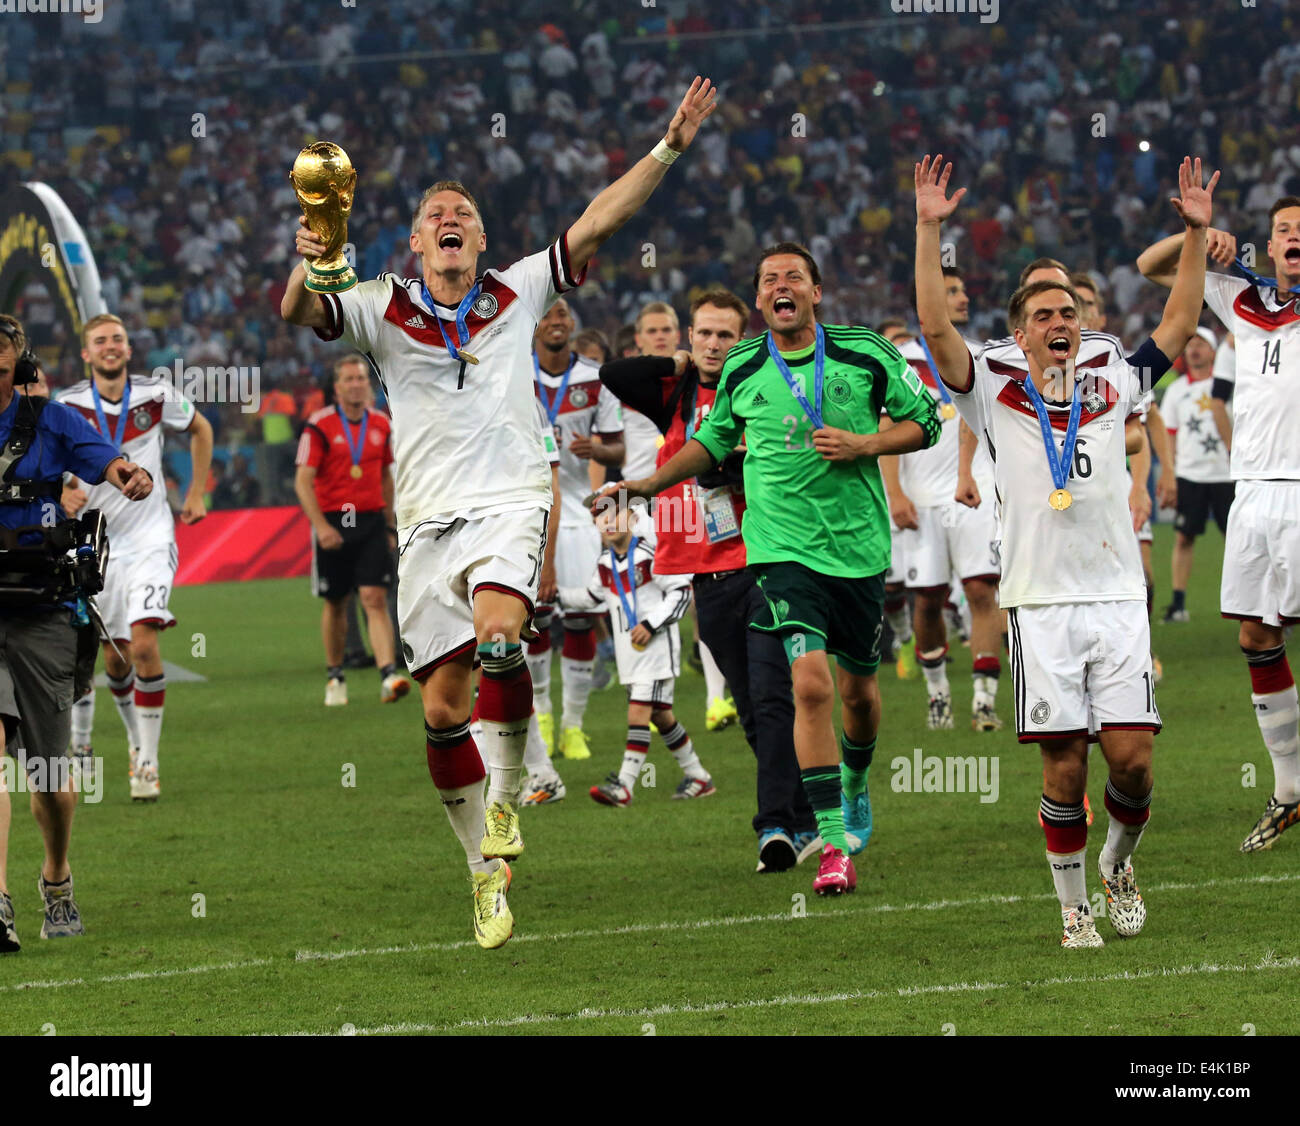 Rio de Janeiro, Brazil. 13th July, 2014. World Cup Final. Germany versus Argentina. Schweinsteiger celebrates with trophy Credit:  Action Plus Sports/Alamy Live News Stock Photo